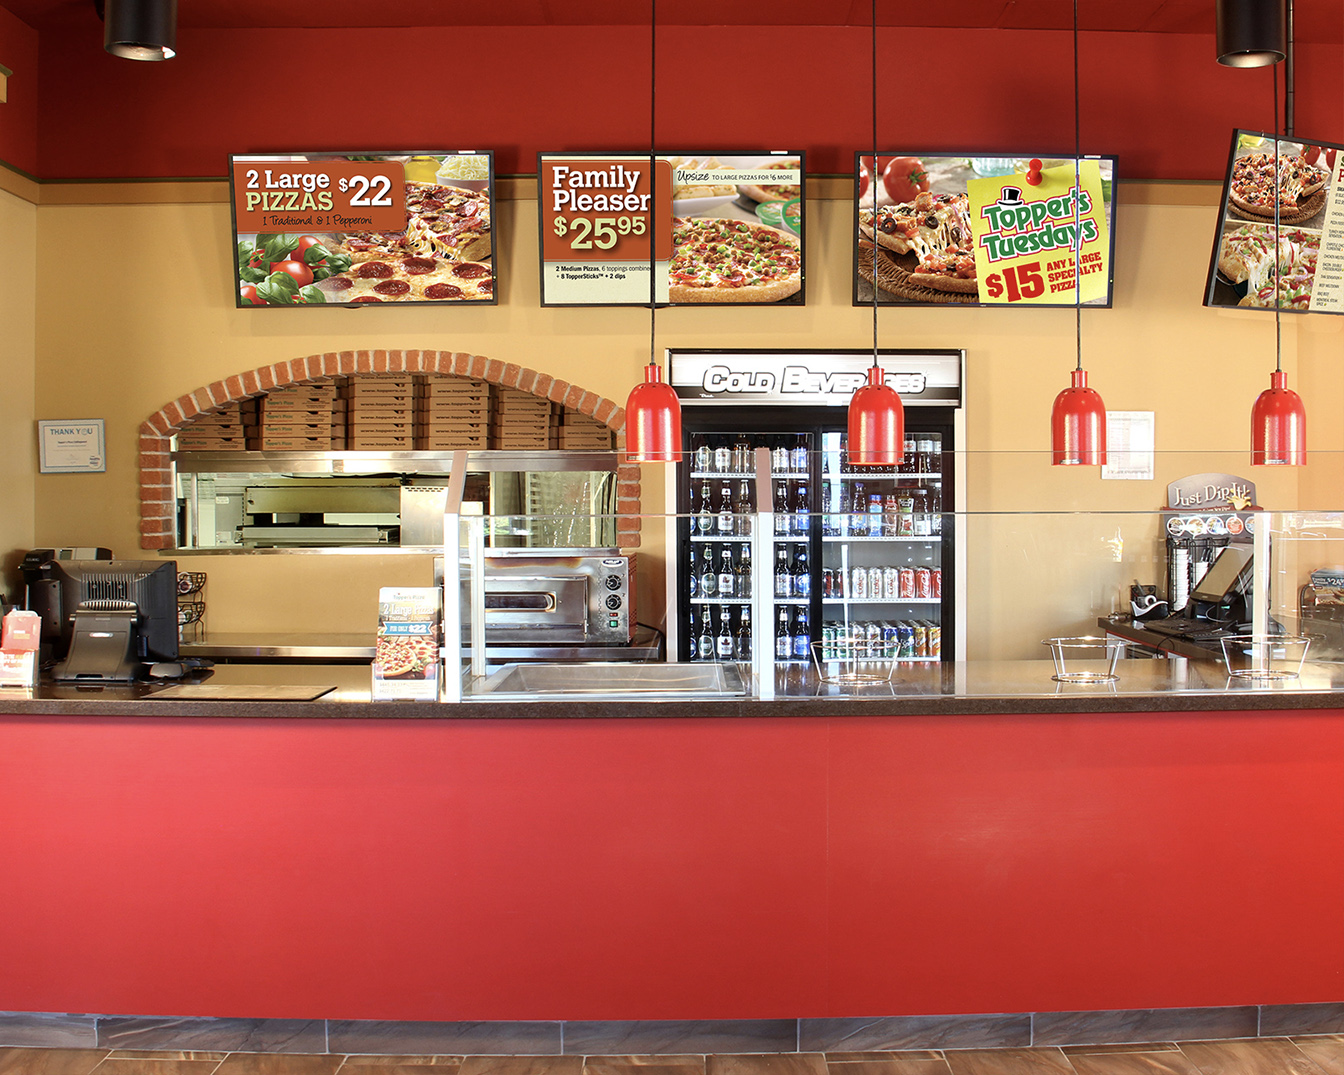 Topper's Pizza Franchises - What We Offer